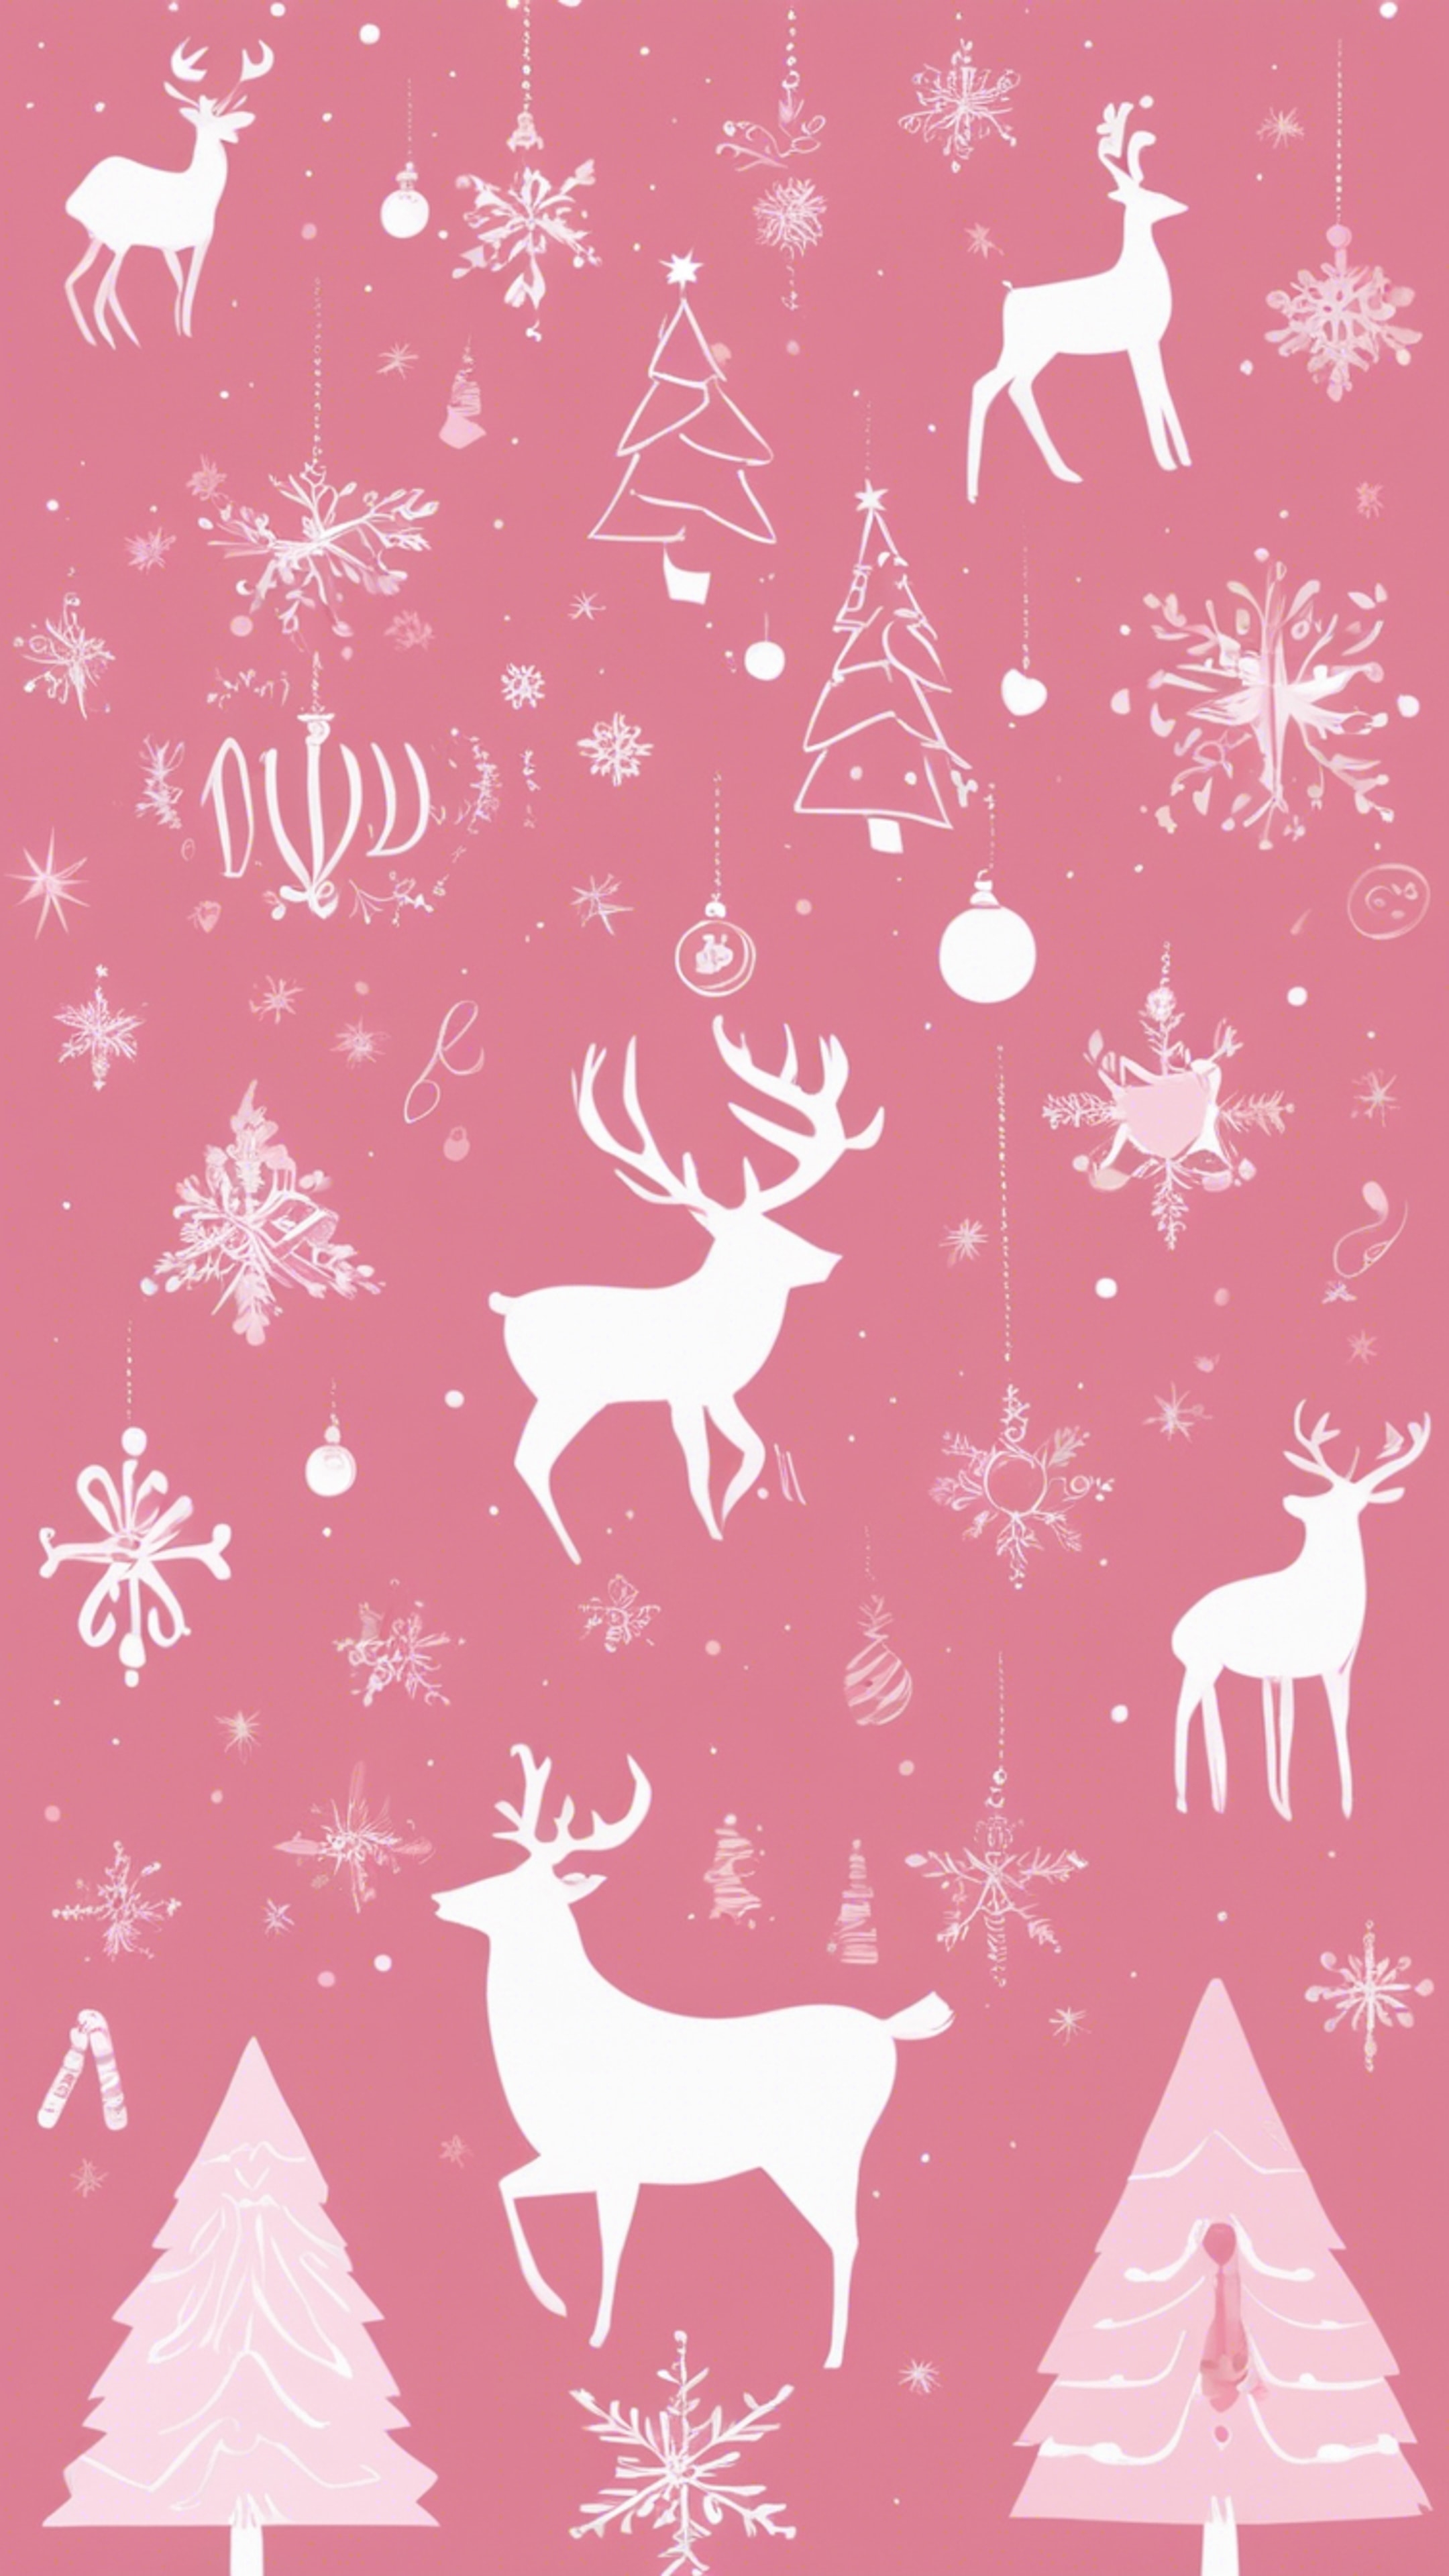 A minimally designed Christmas card with elegant pink illustrations of Christmas icons. Tapet[9459a801713f4624aabe]